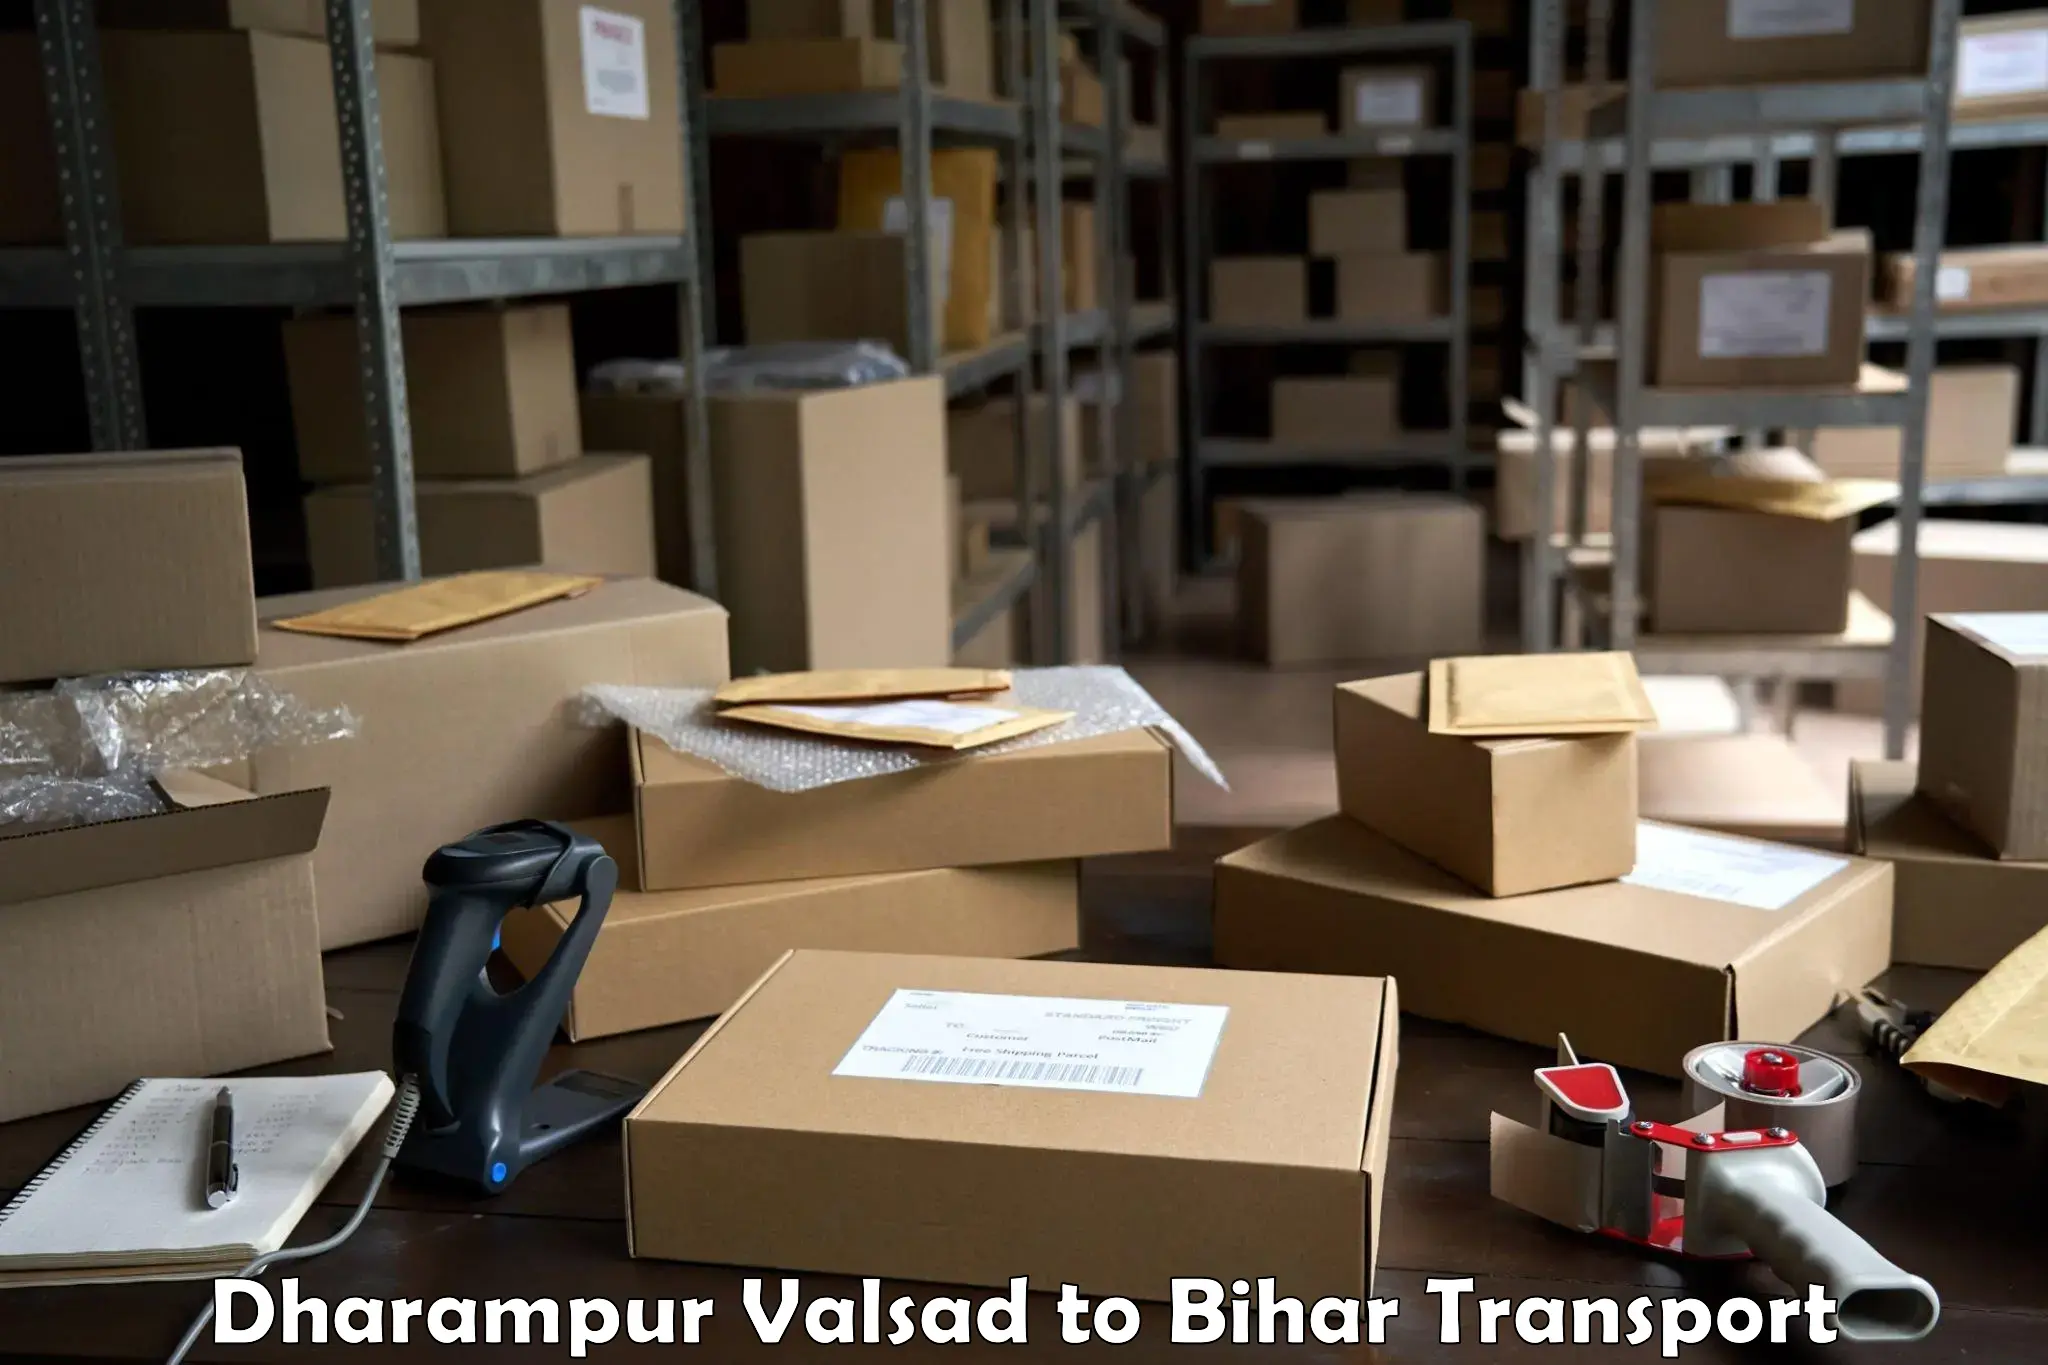 Pick up transport service Dharampur Valsad to Biraul